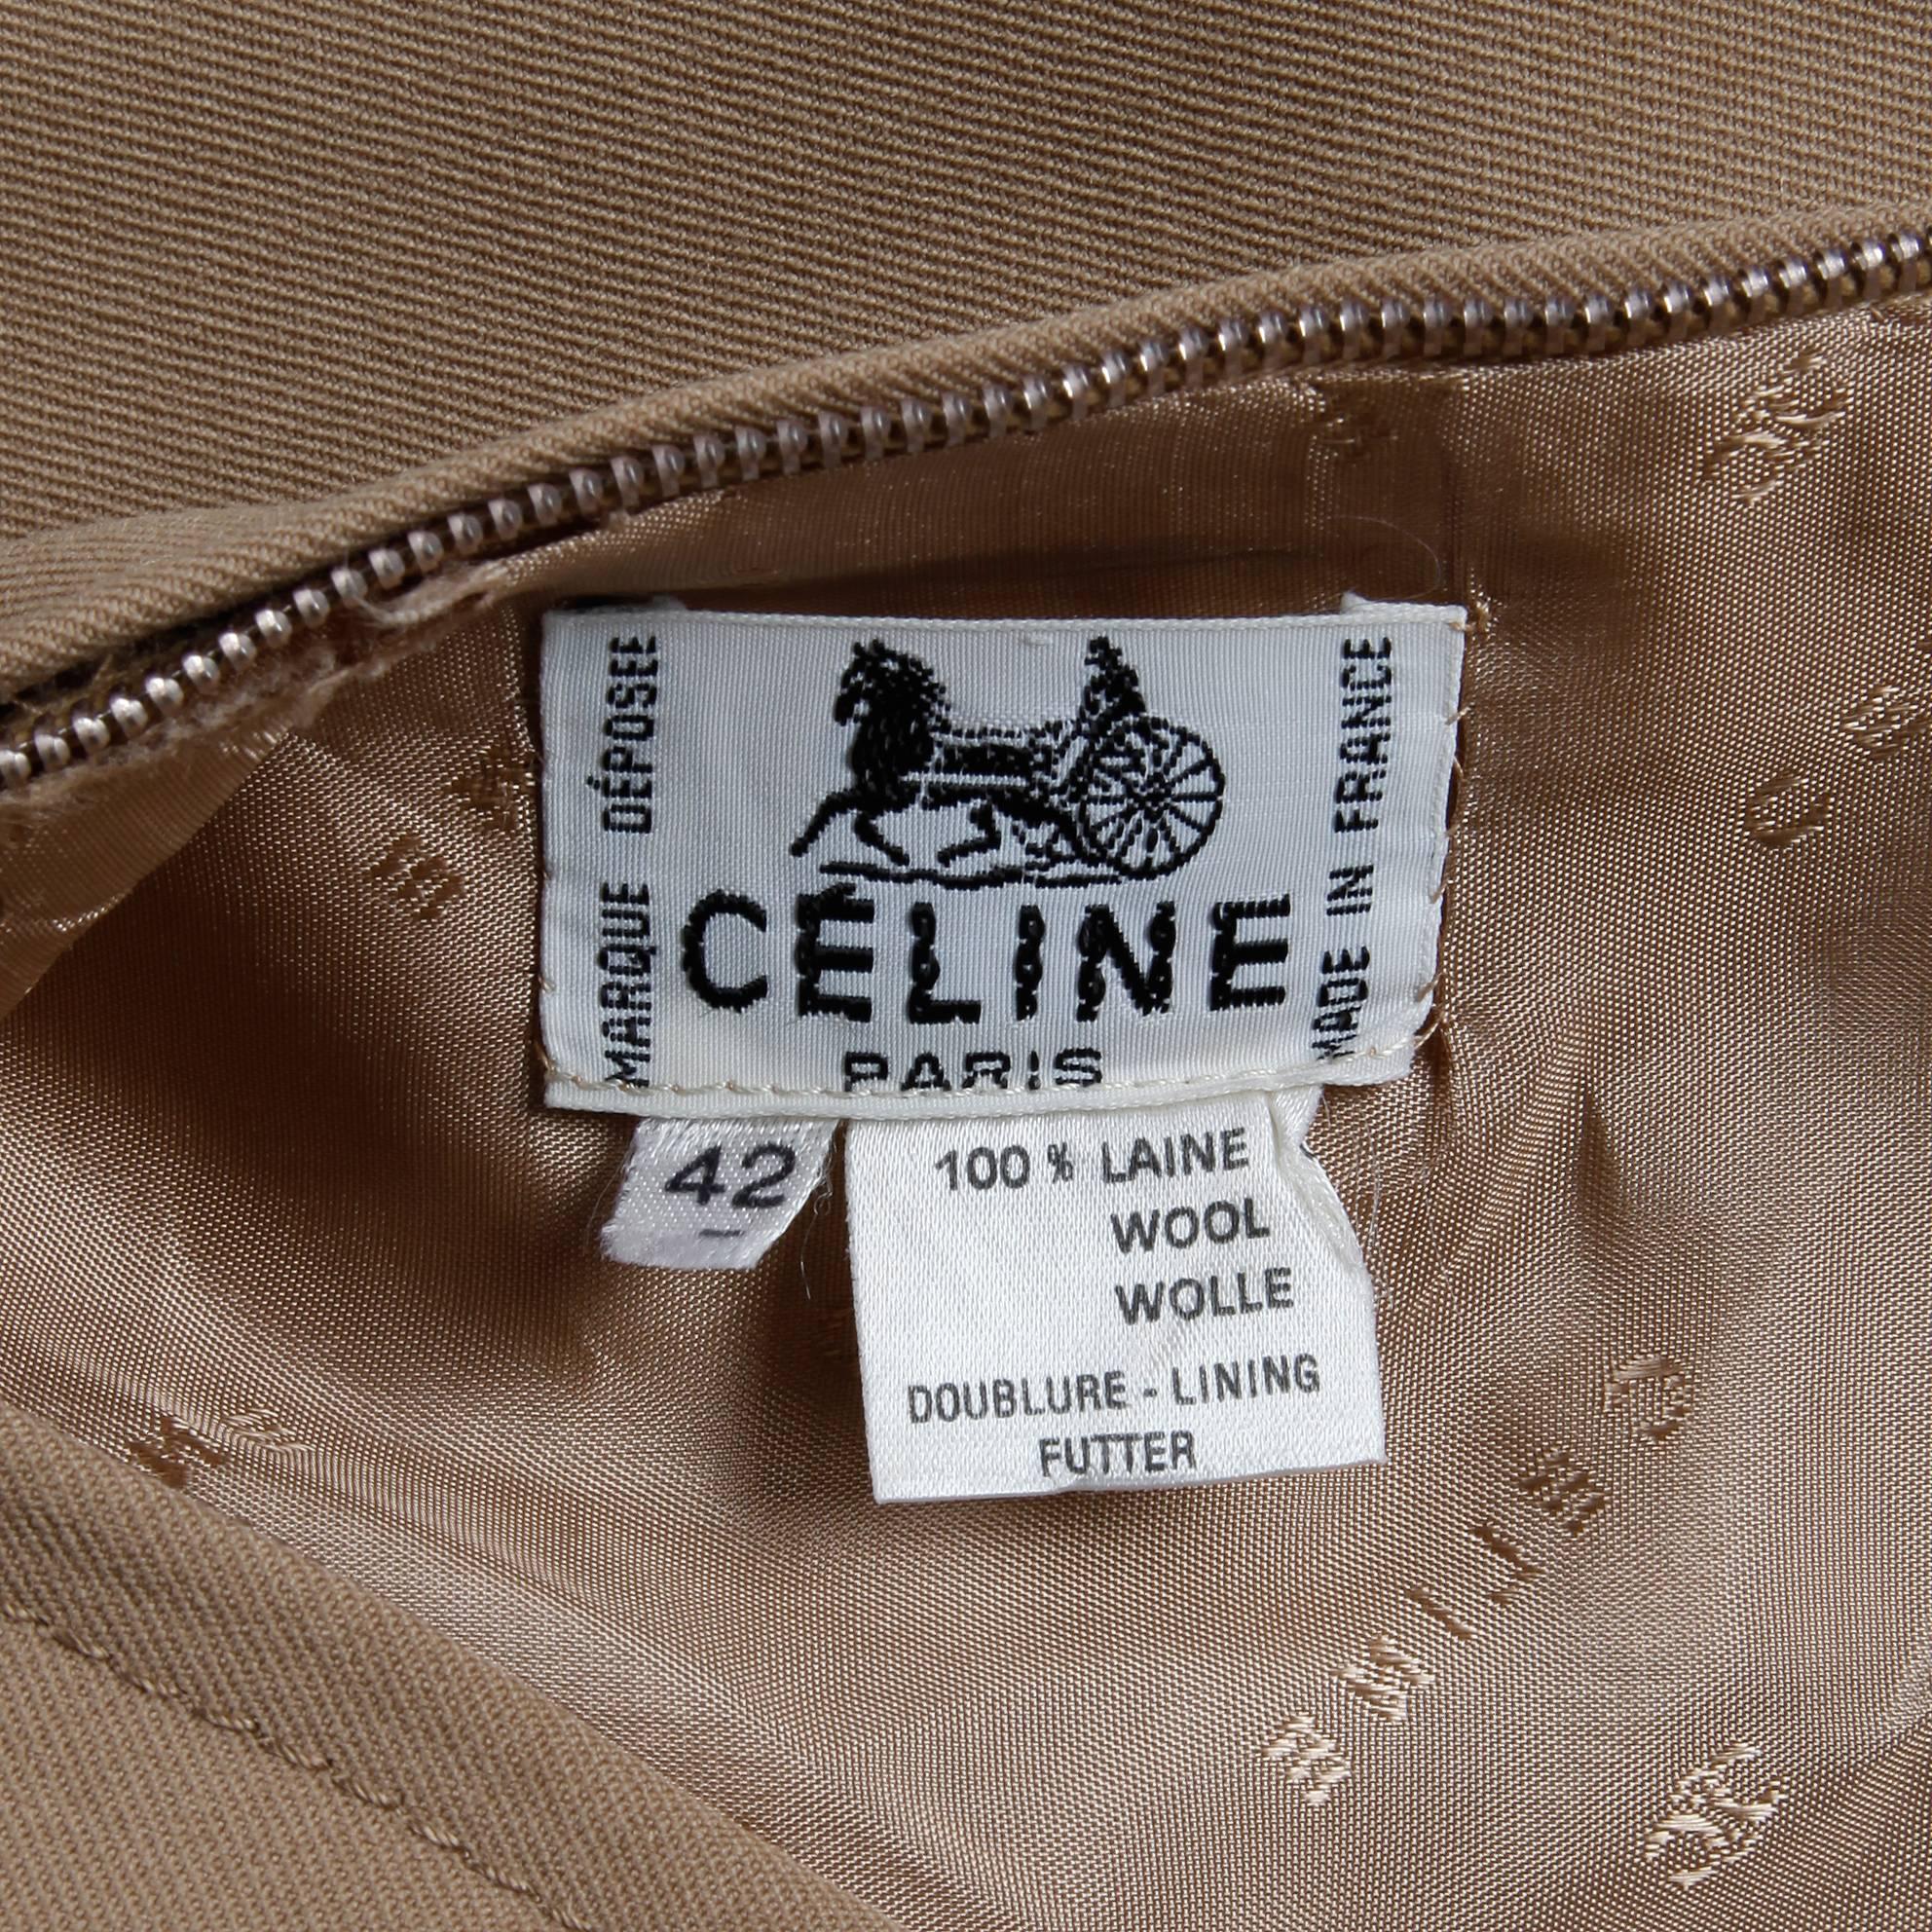 Vintage 1970s brown pleated skirt with leather and goldtone Celine logo buckle by Celine Paris. Fully lined with rear metal zip and hook closure. 100% wool. The marked size is 42, and the skirt fits like a modern size small. The waist measures 26